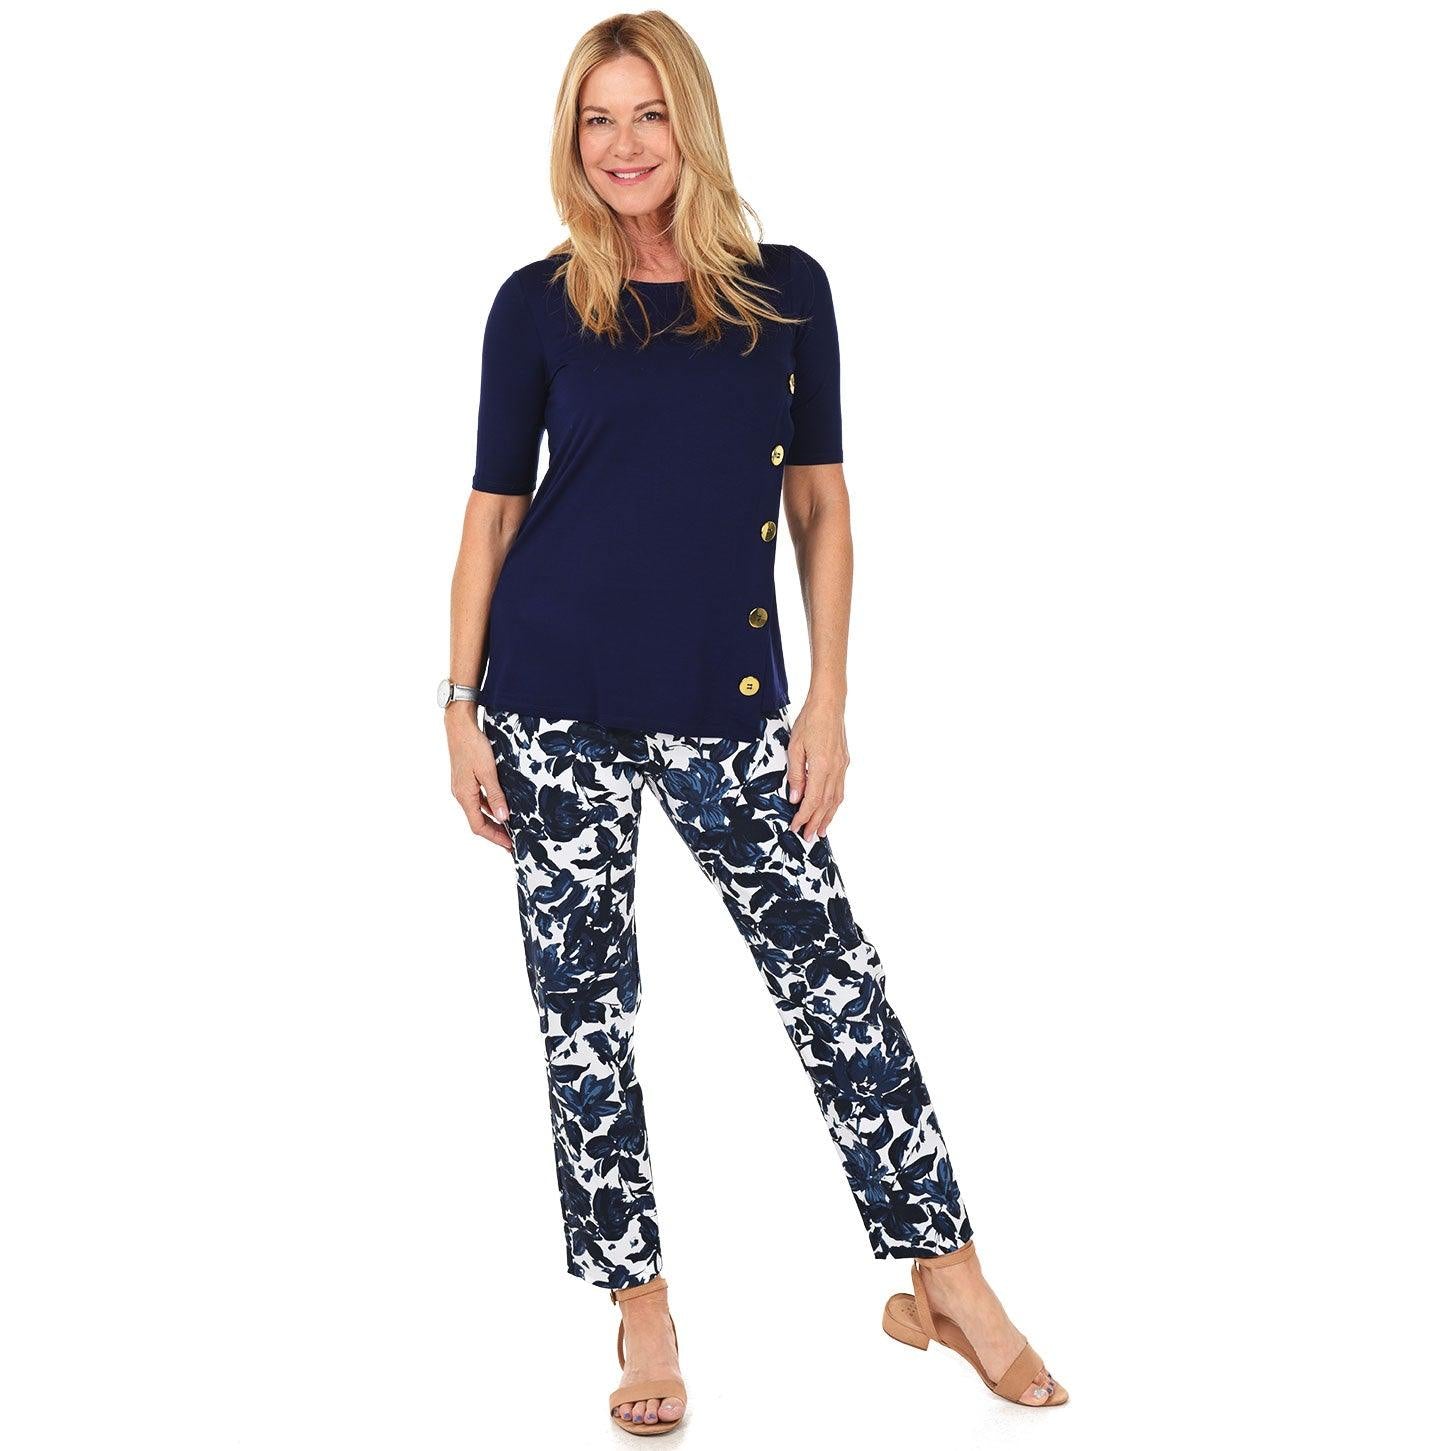 Have You Heard About Kristin Crenshaw Pants? - Anthony's Ladies Apparel